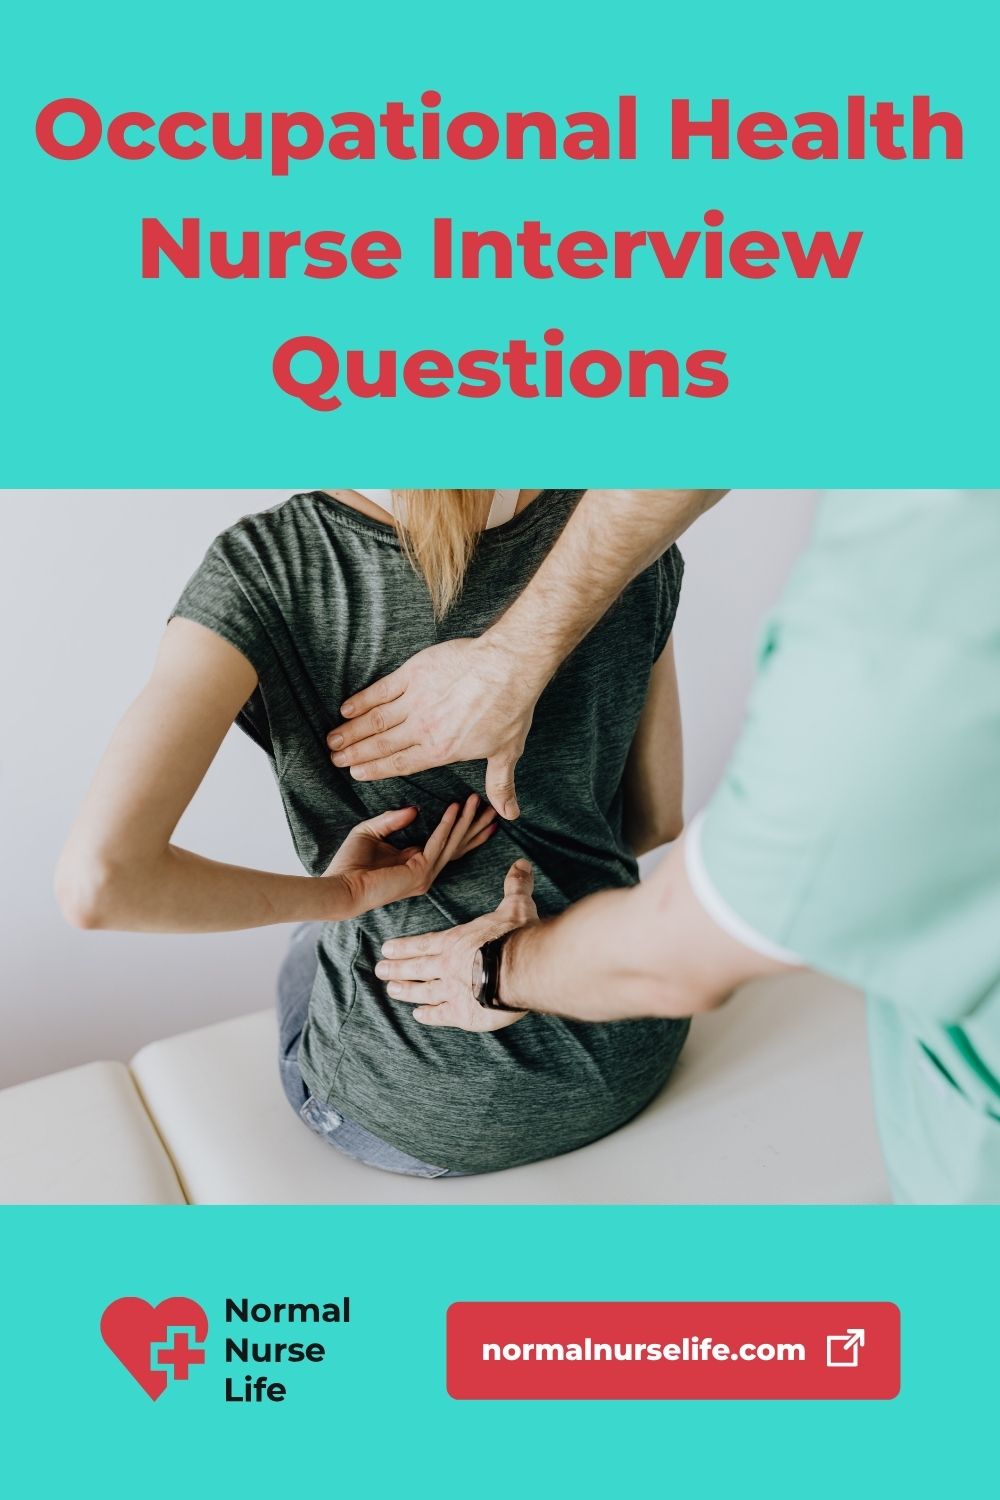 Interview questions for occupation health nurse